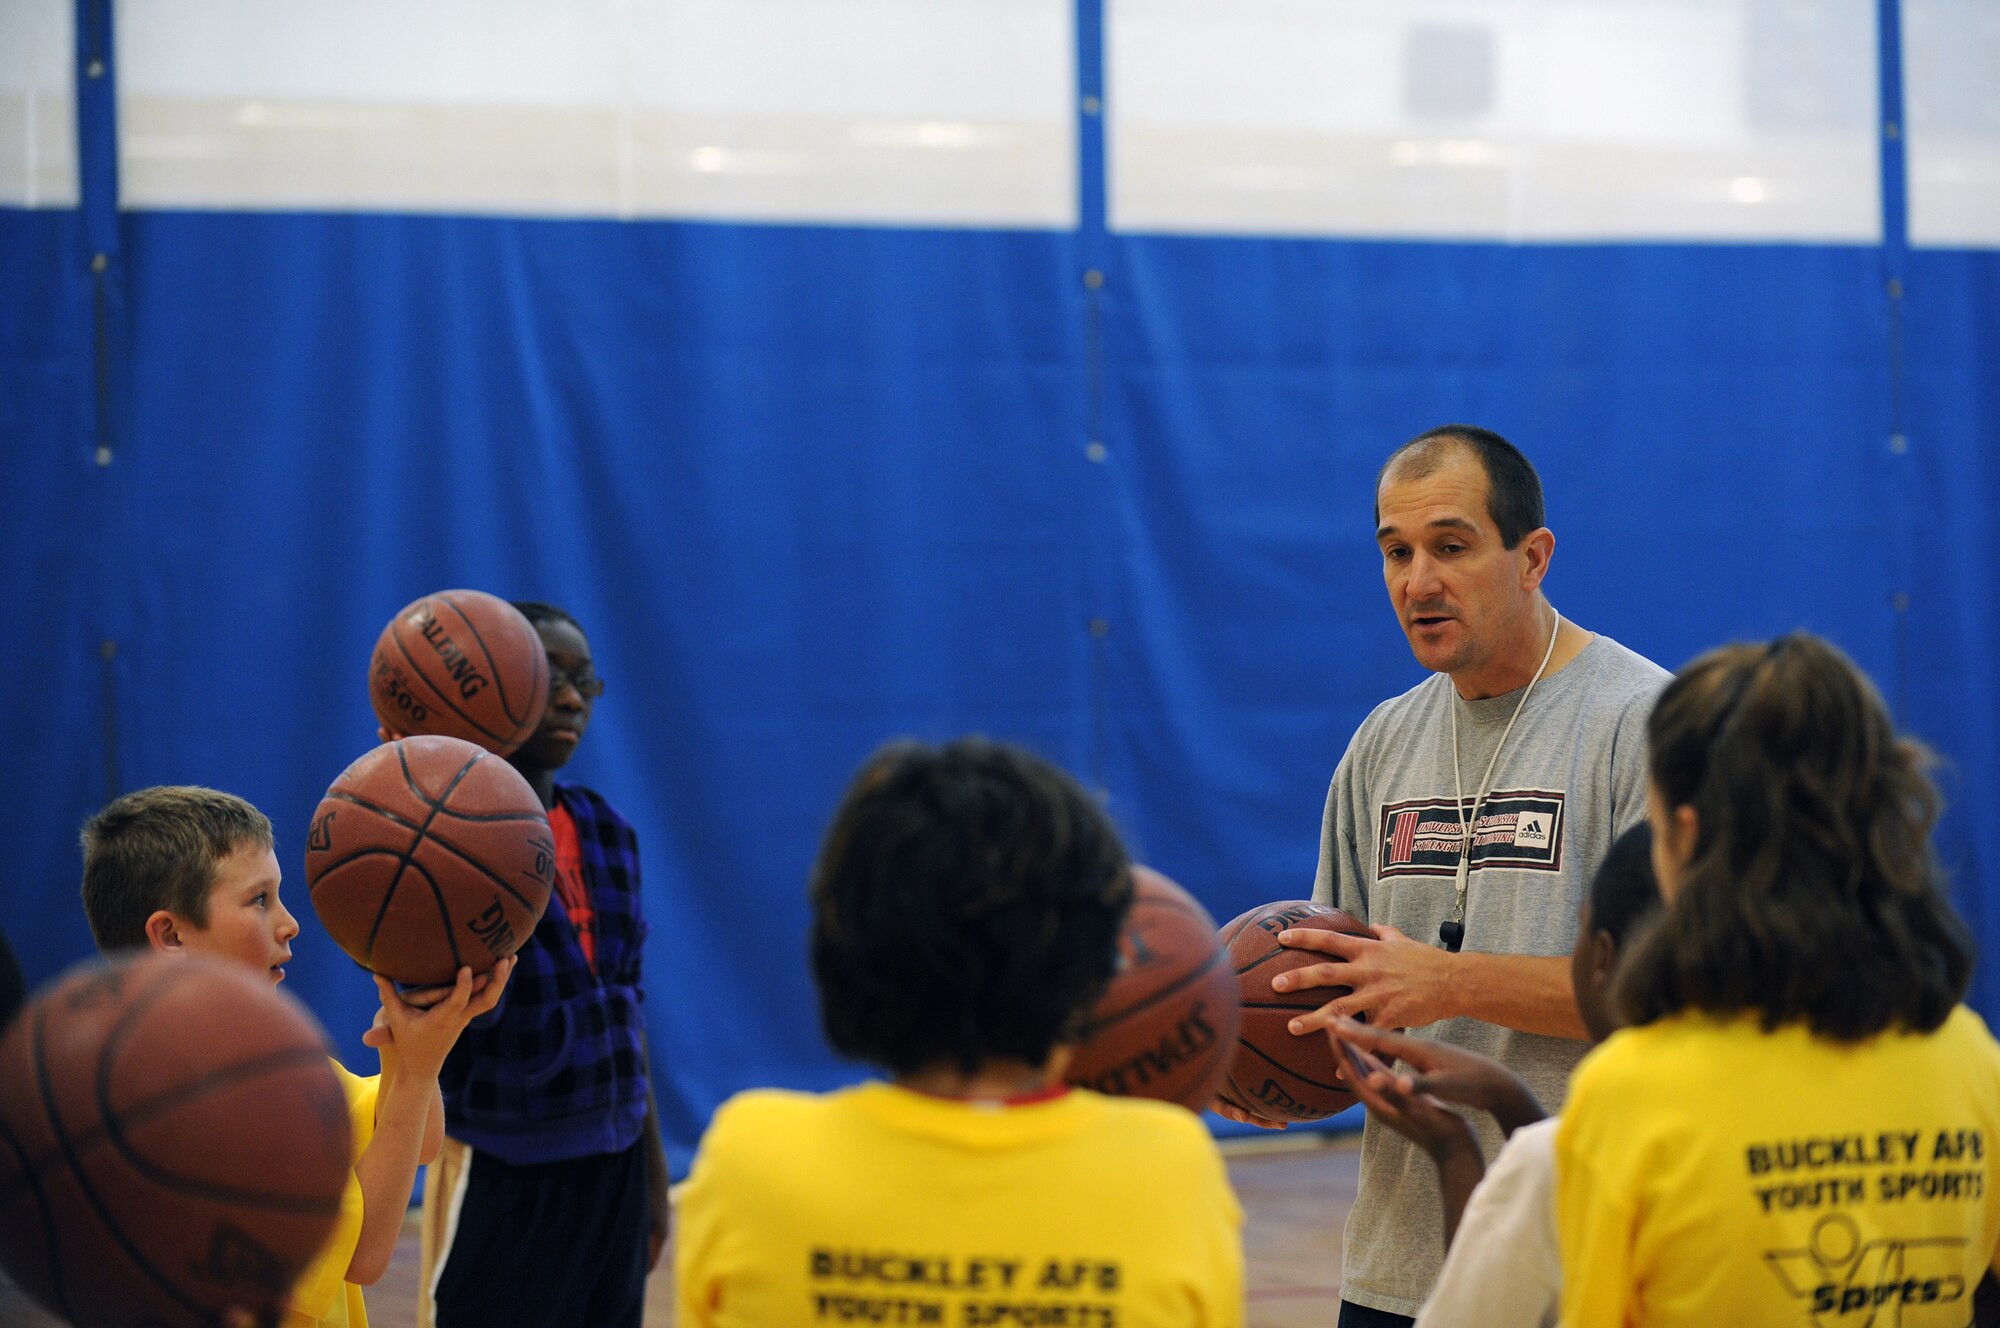 Tom Cox, 460th Force Support Squadron youth programs director, coaches Buckley youths on basketball fundamentals during a basketball clinic hosted by the 460th Force Support Squadron at the fitness center Oct. 17. (U.S. Air Force photo by Senior Airman John Easterling)